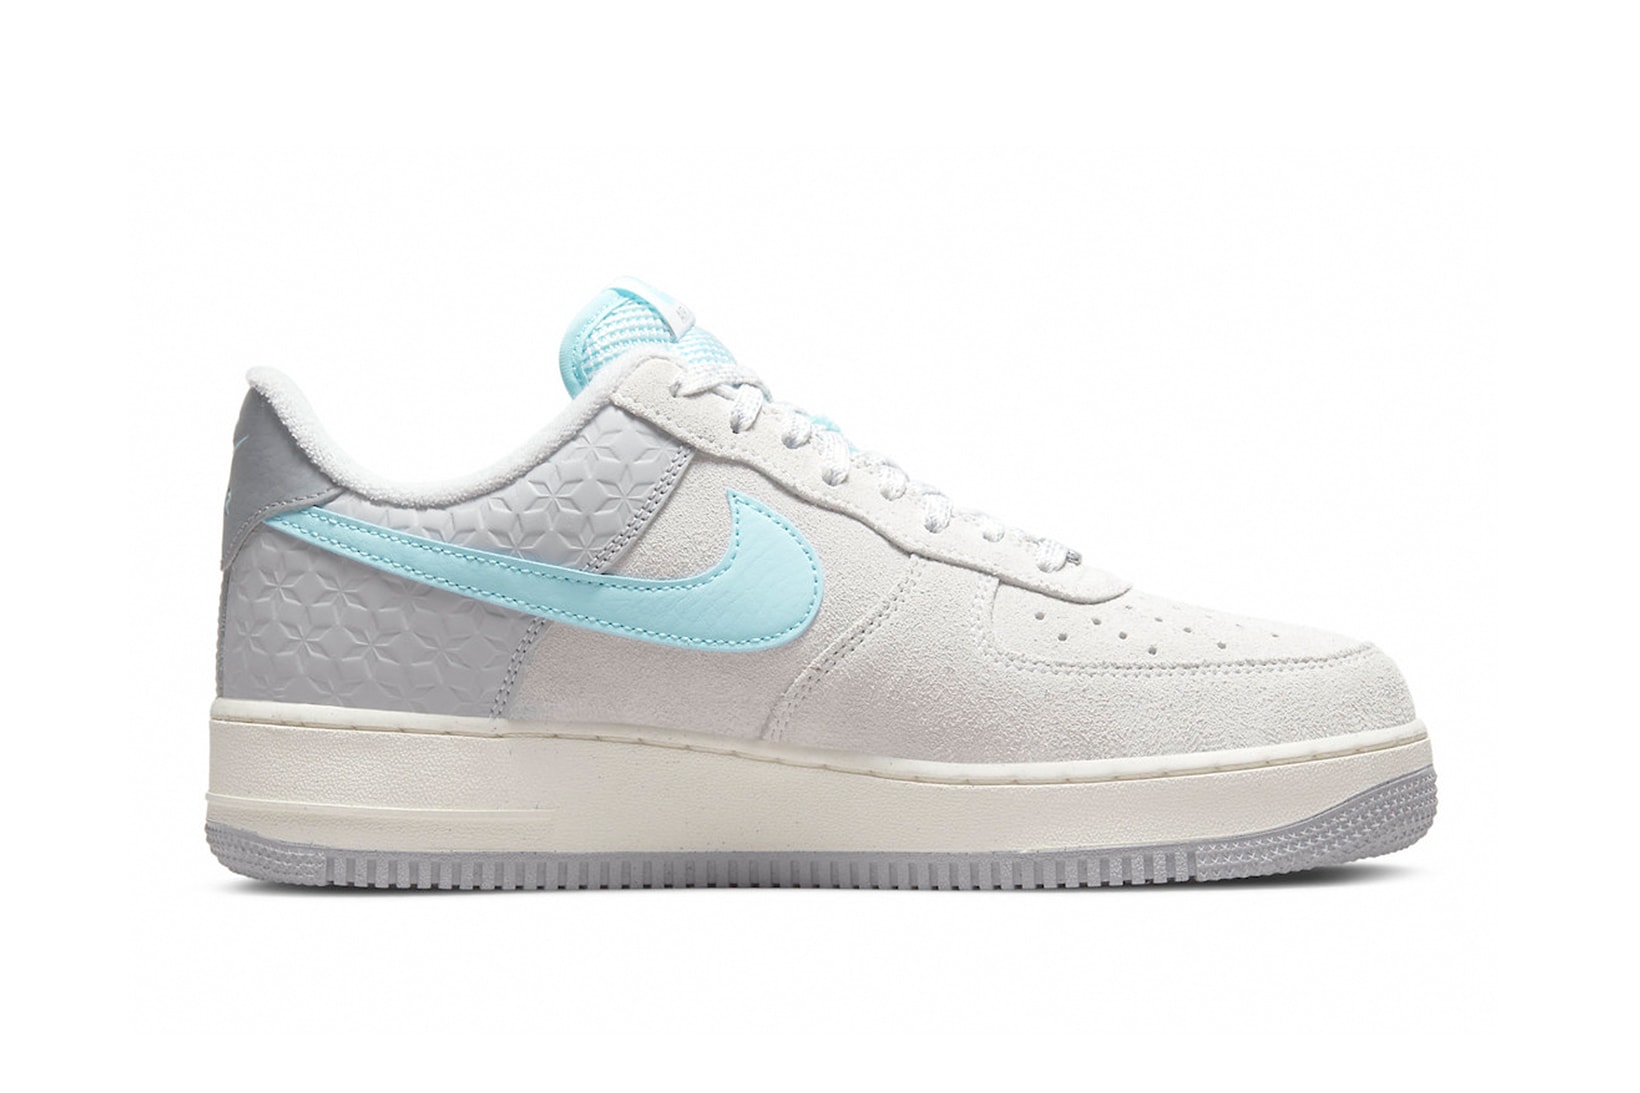 Nike Air Force 1 Low "Snowflake" Sneakers Blue White Gray Medial View 2